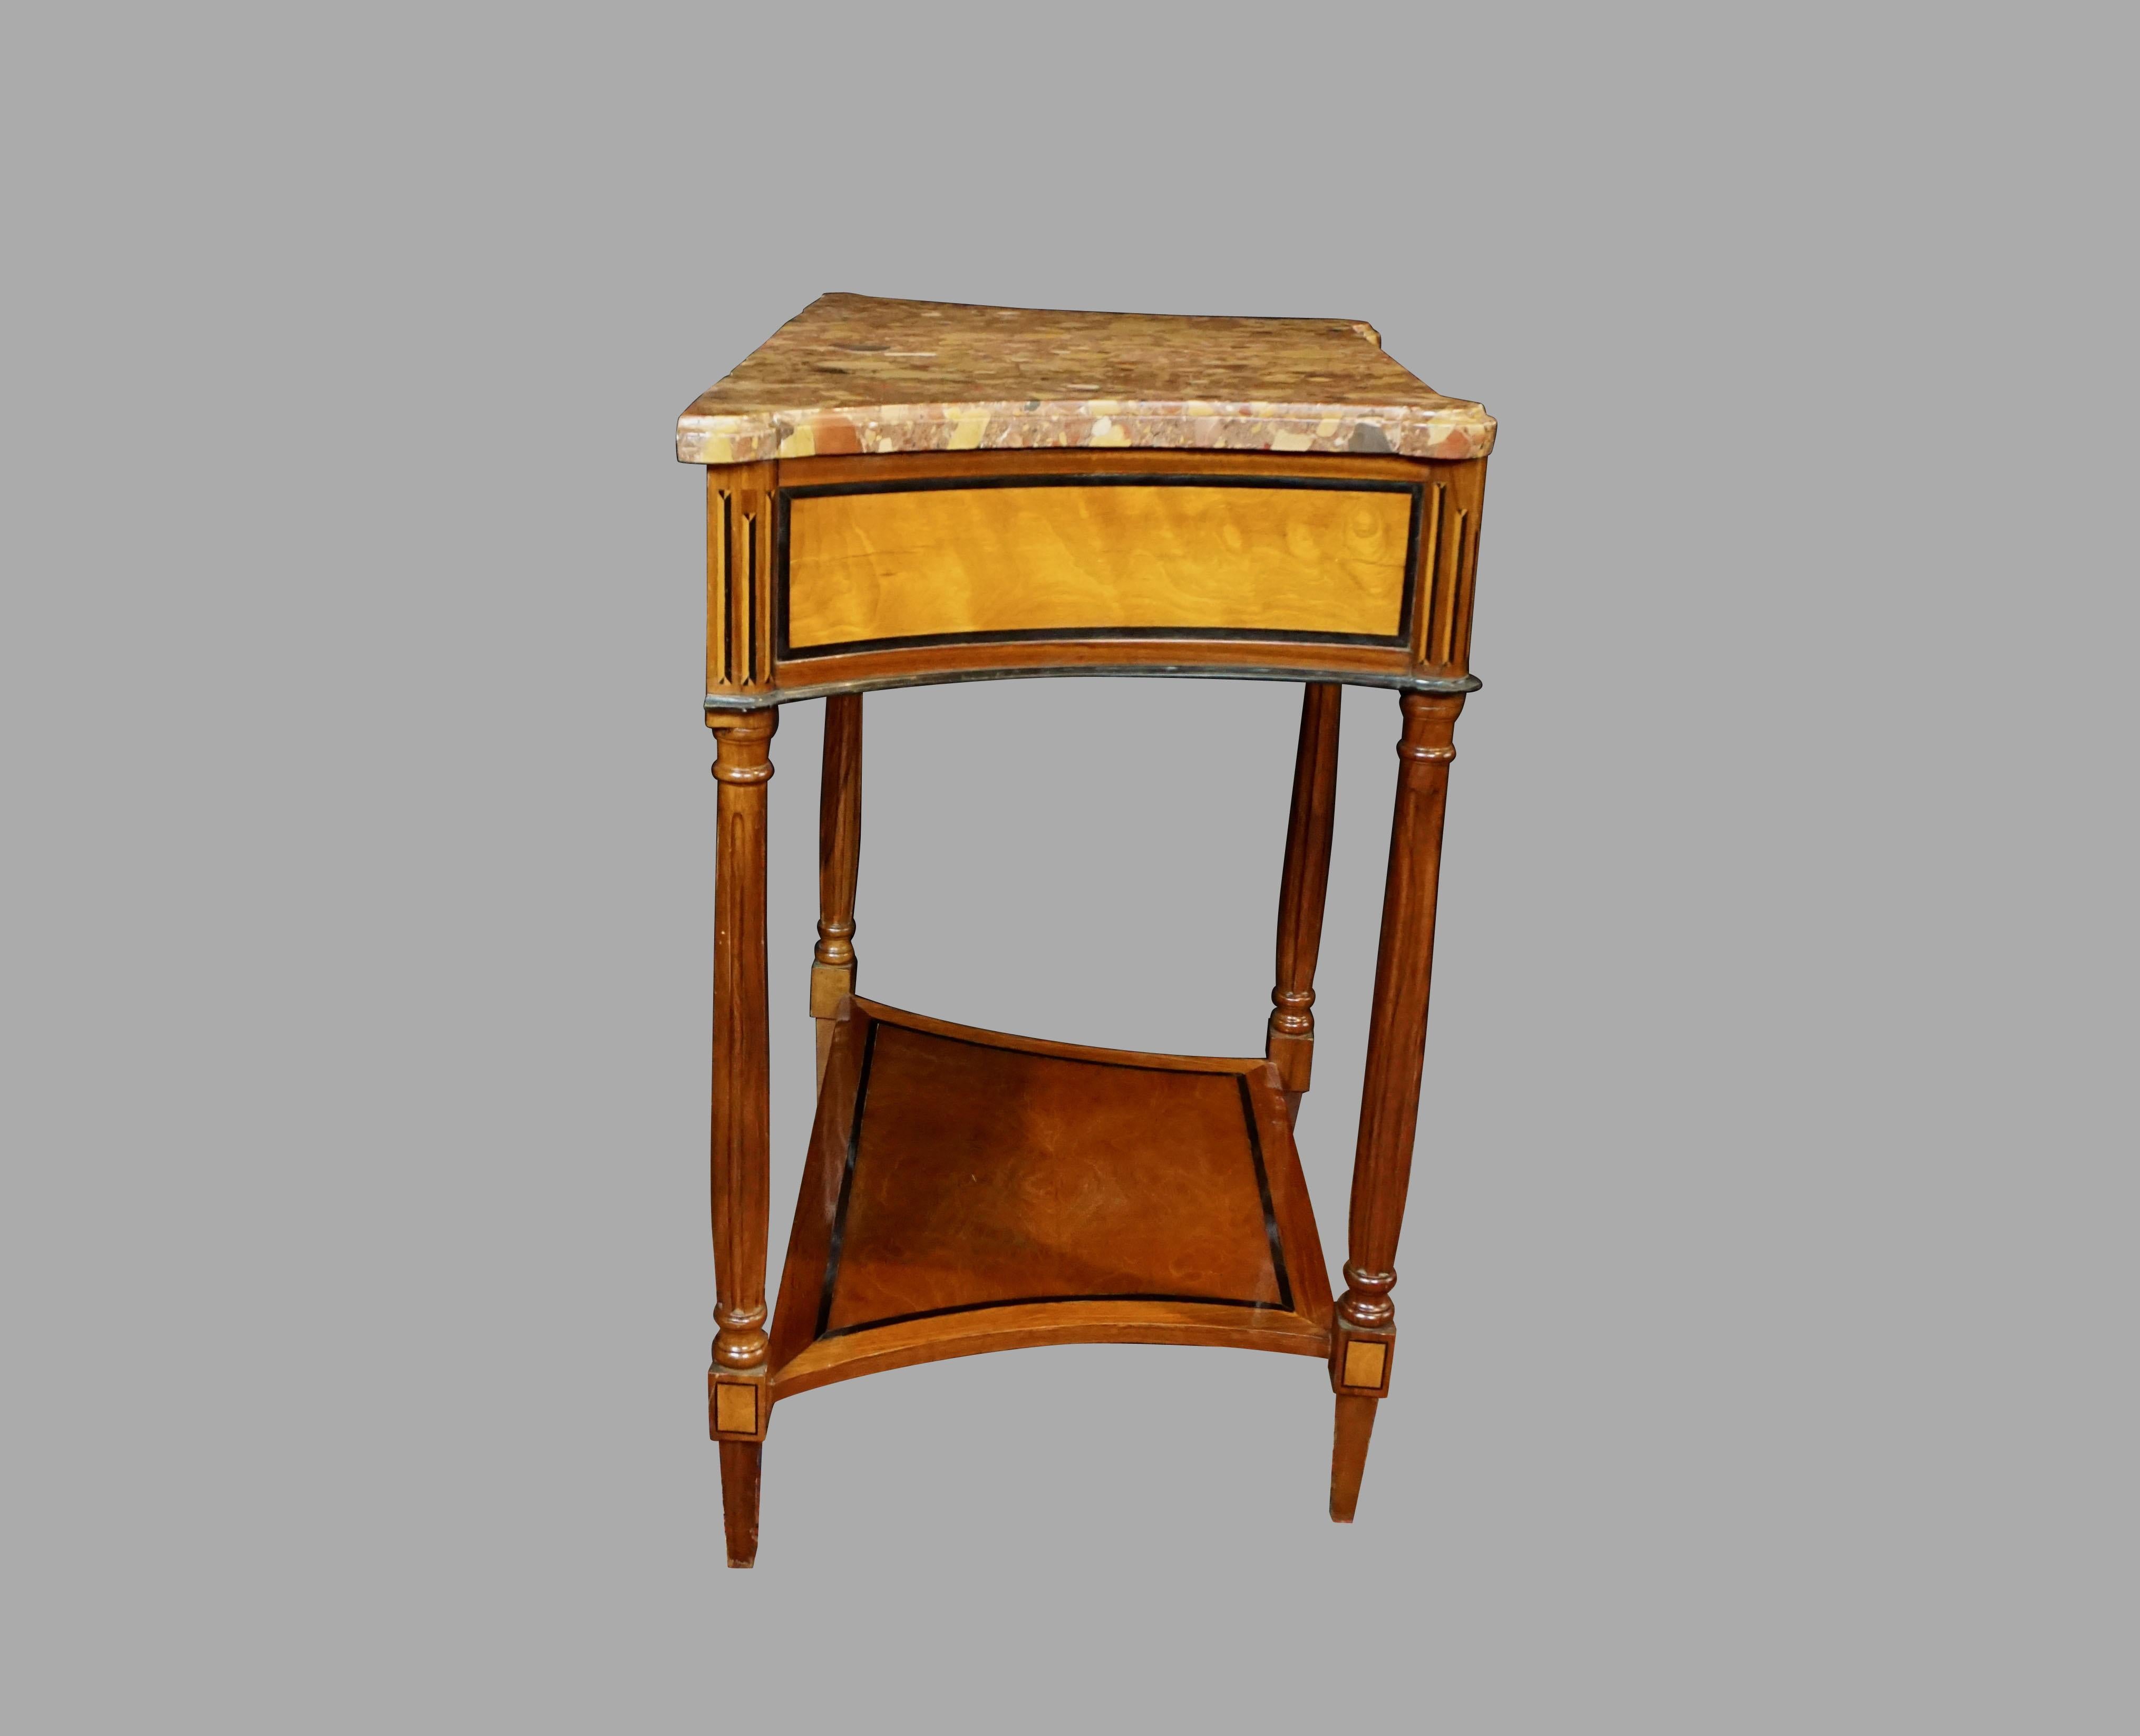 Northern European Inlaid Satinwood Neoclassical Marble-Top Console Table 1